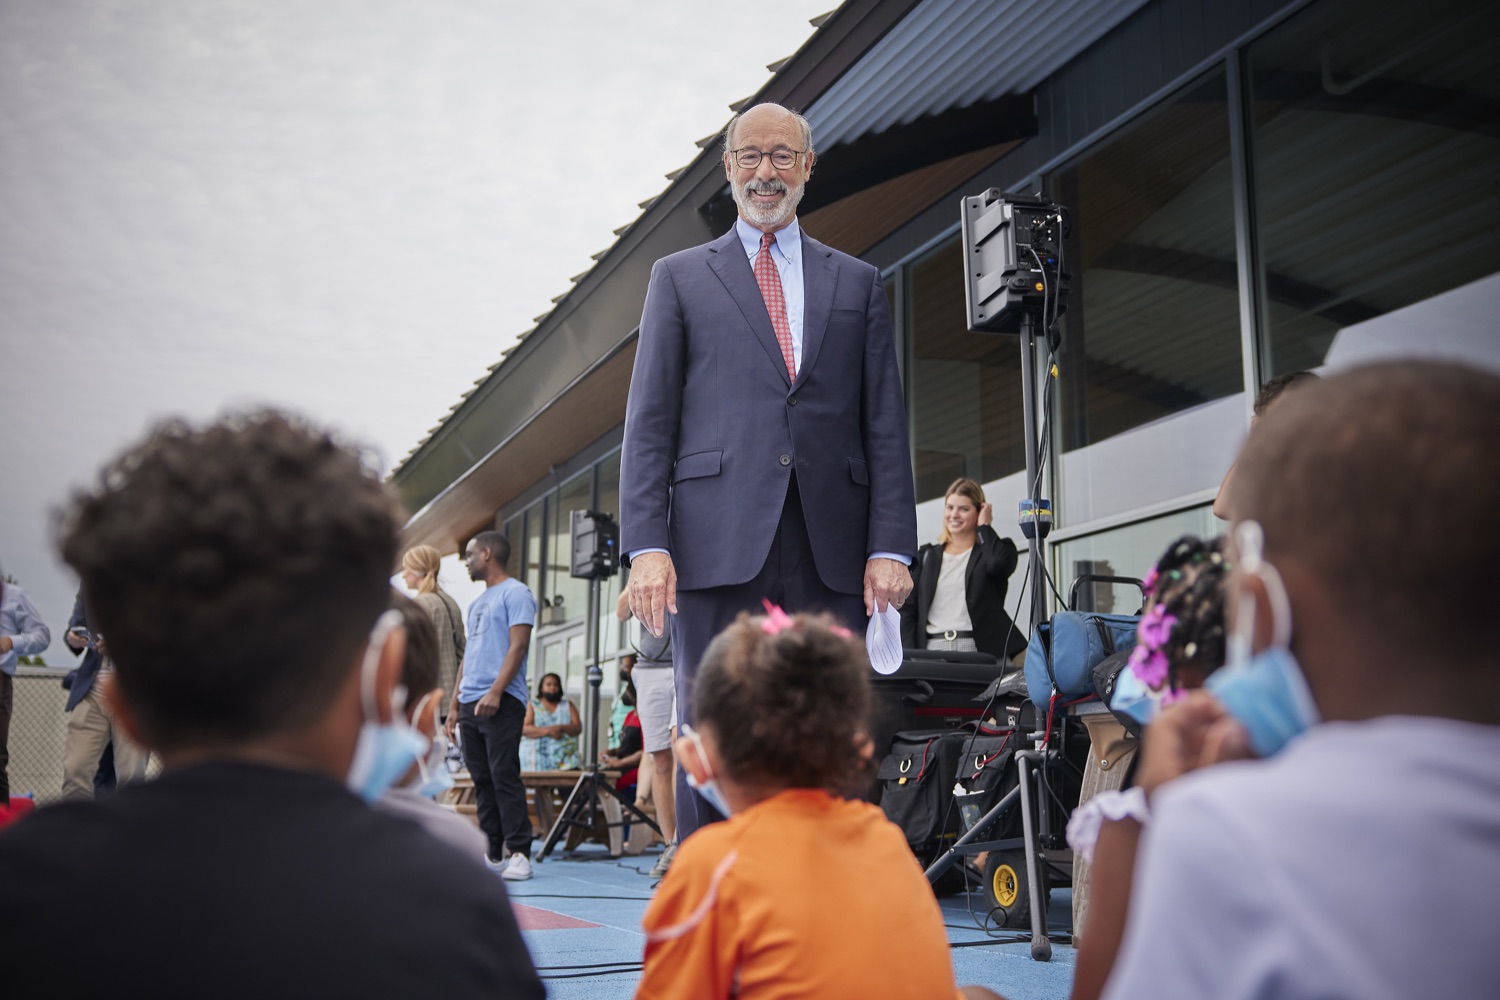 Pennsylvania Governor Tom Wolf greets students at Crispus Attucks.  Governor Tom Wolf today visited the Early Learning Center at Crispus Attucks in York to highlight his new state child tax credit program, modeled after the federal program, to support Pennsylvanias working families and ensure unbarred access to high-quality early childhood education.  York, PA   July 26, 2022<br><a href="https://filesource.amperwave.net/commonwealthofpa/photo/22049_gov_childTaxCredit_dz_004.JPG" target="_blank">⇣ Download Photo</a>